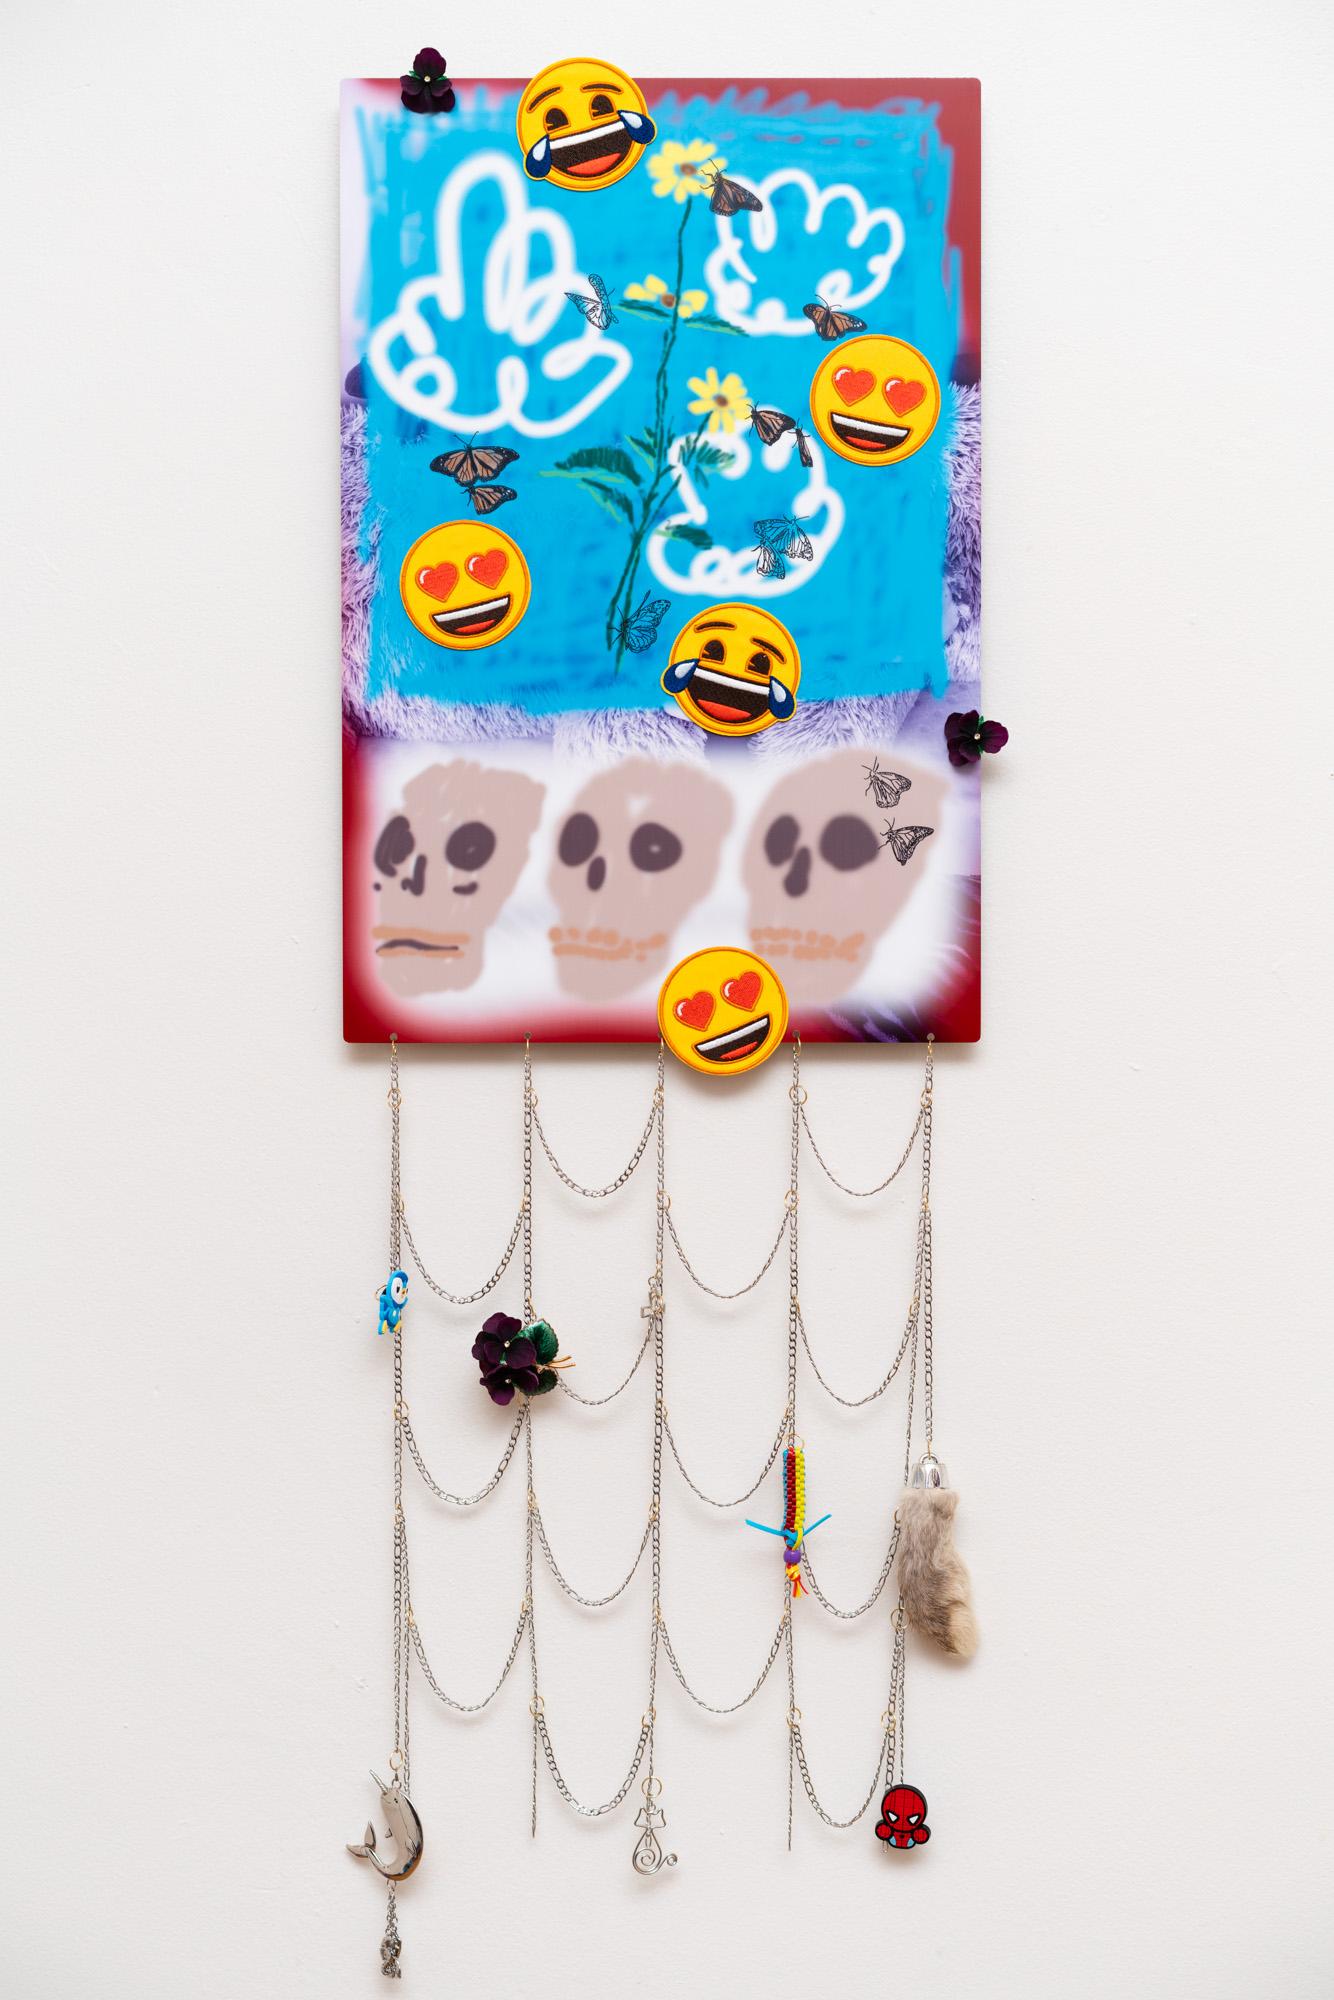 Highly conceptual mixed media wall sculpture Contemporary skull emoji jewelry